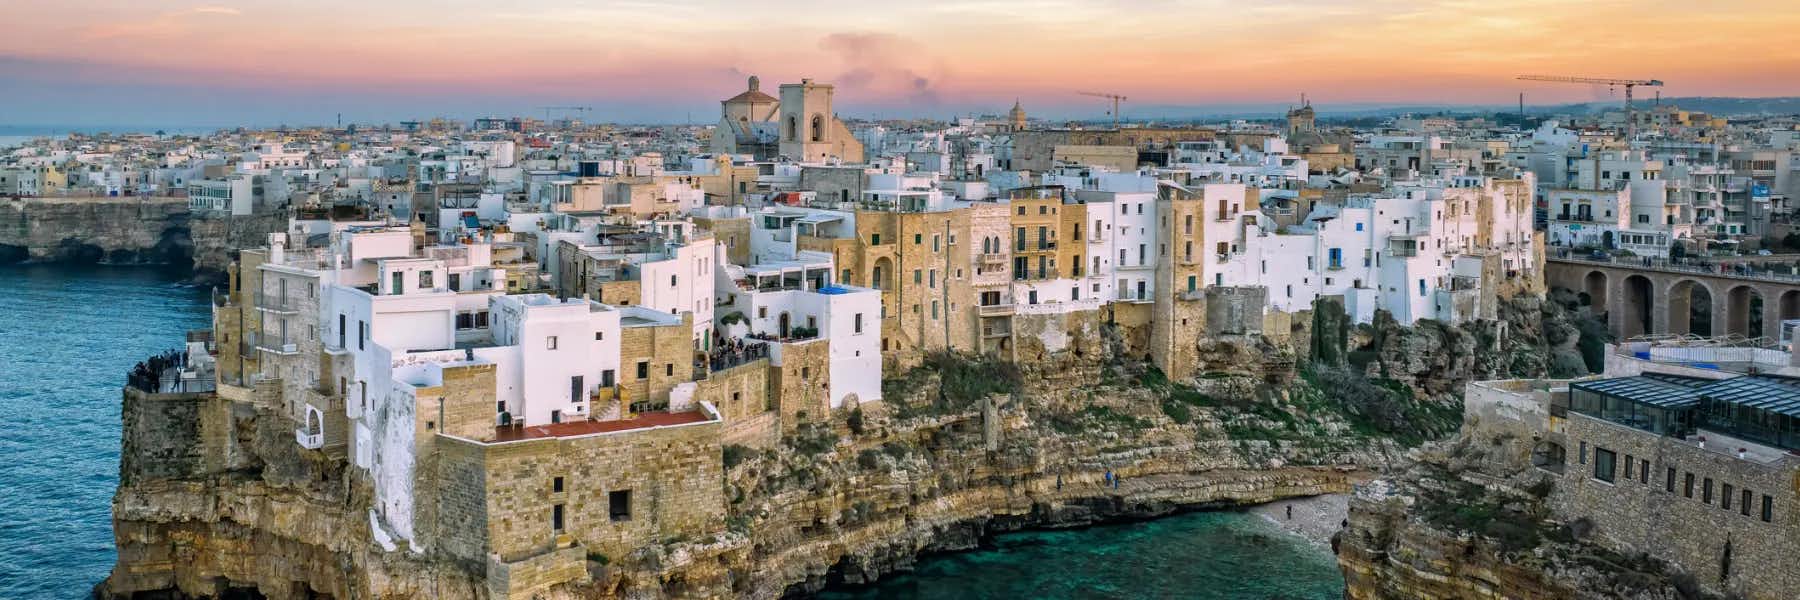 Bari, Italy - Things To Do, Cost of Living Budget and Lifestyle Information